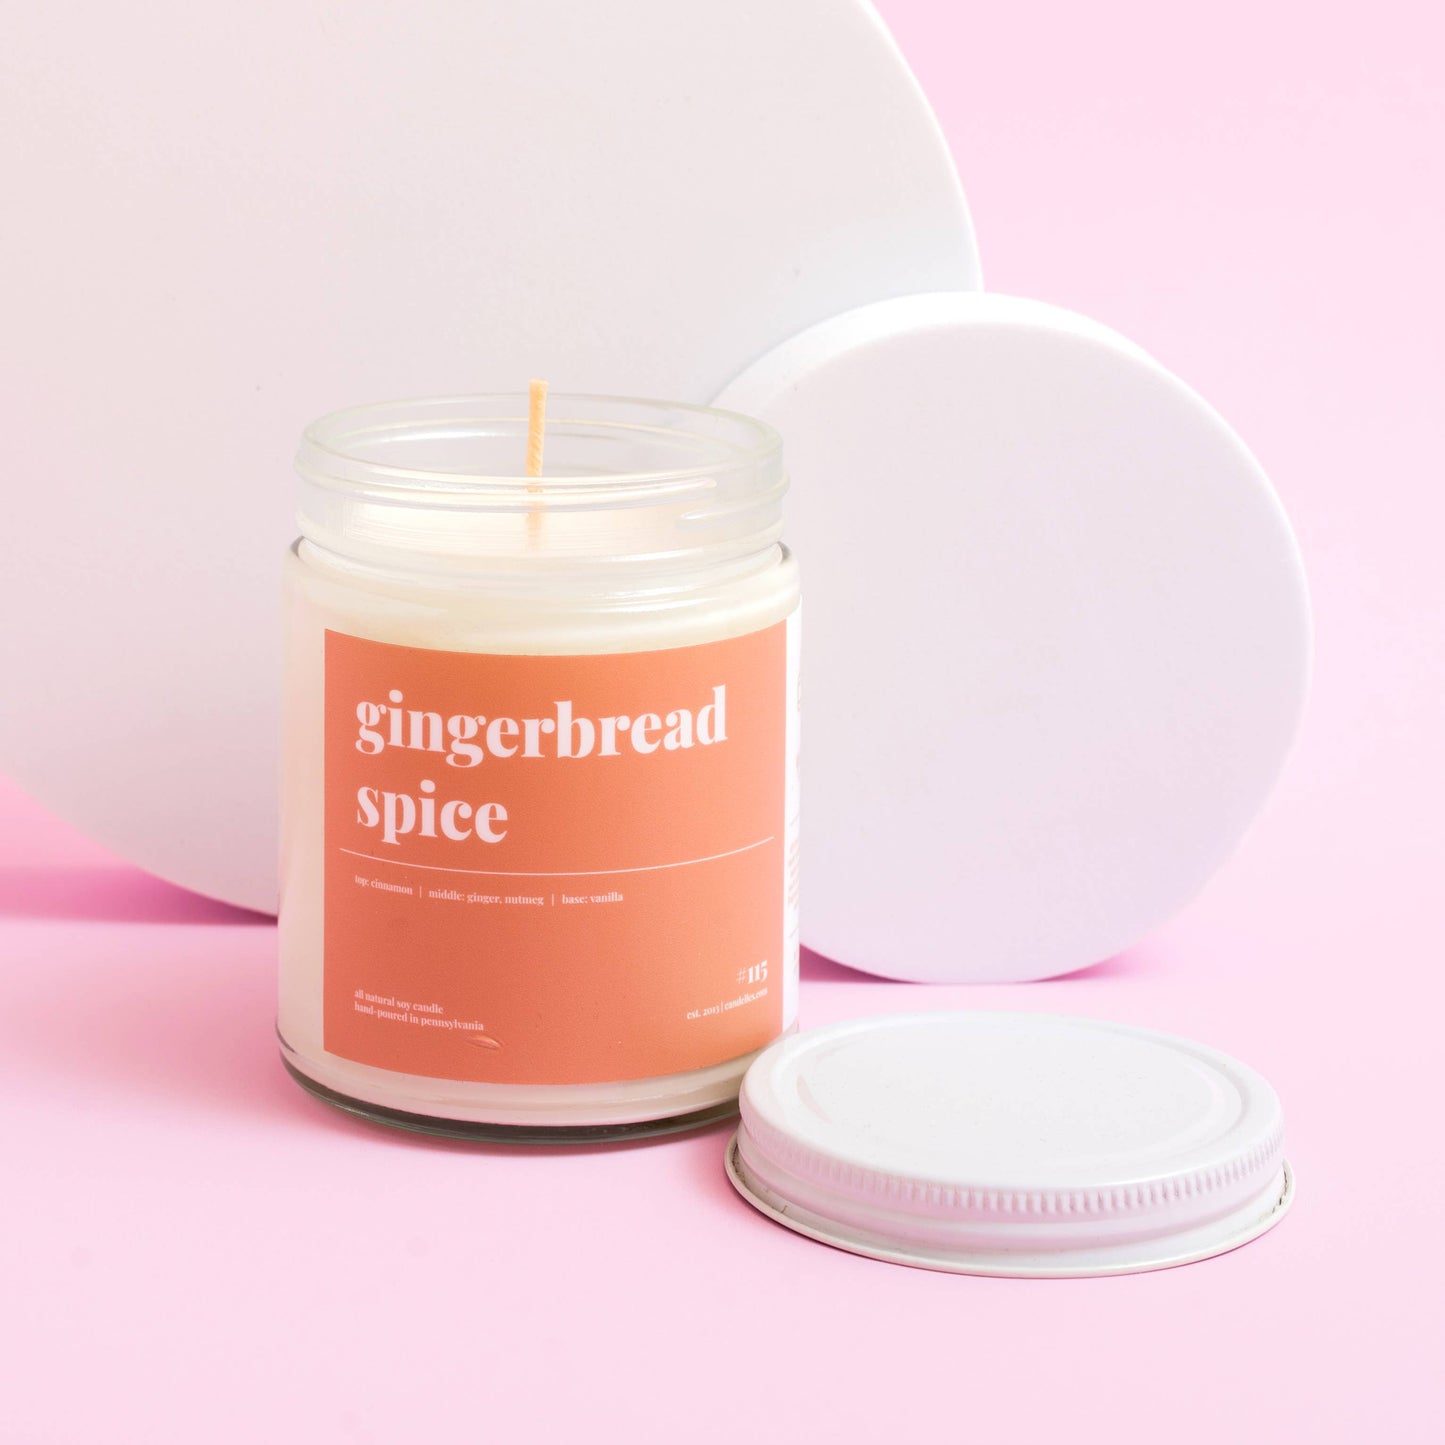 Gingerbread Spice Scented Soy Candle - 9oz.